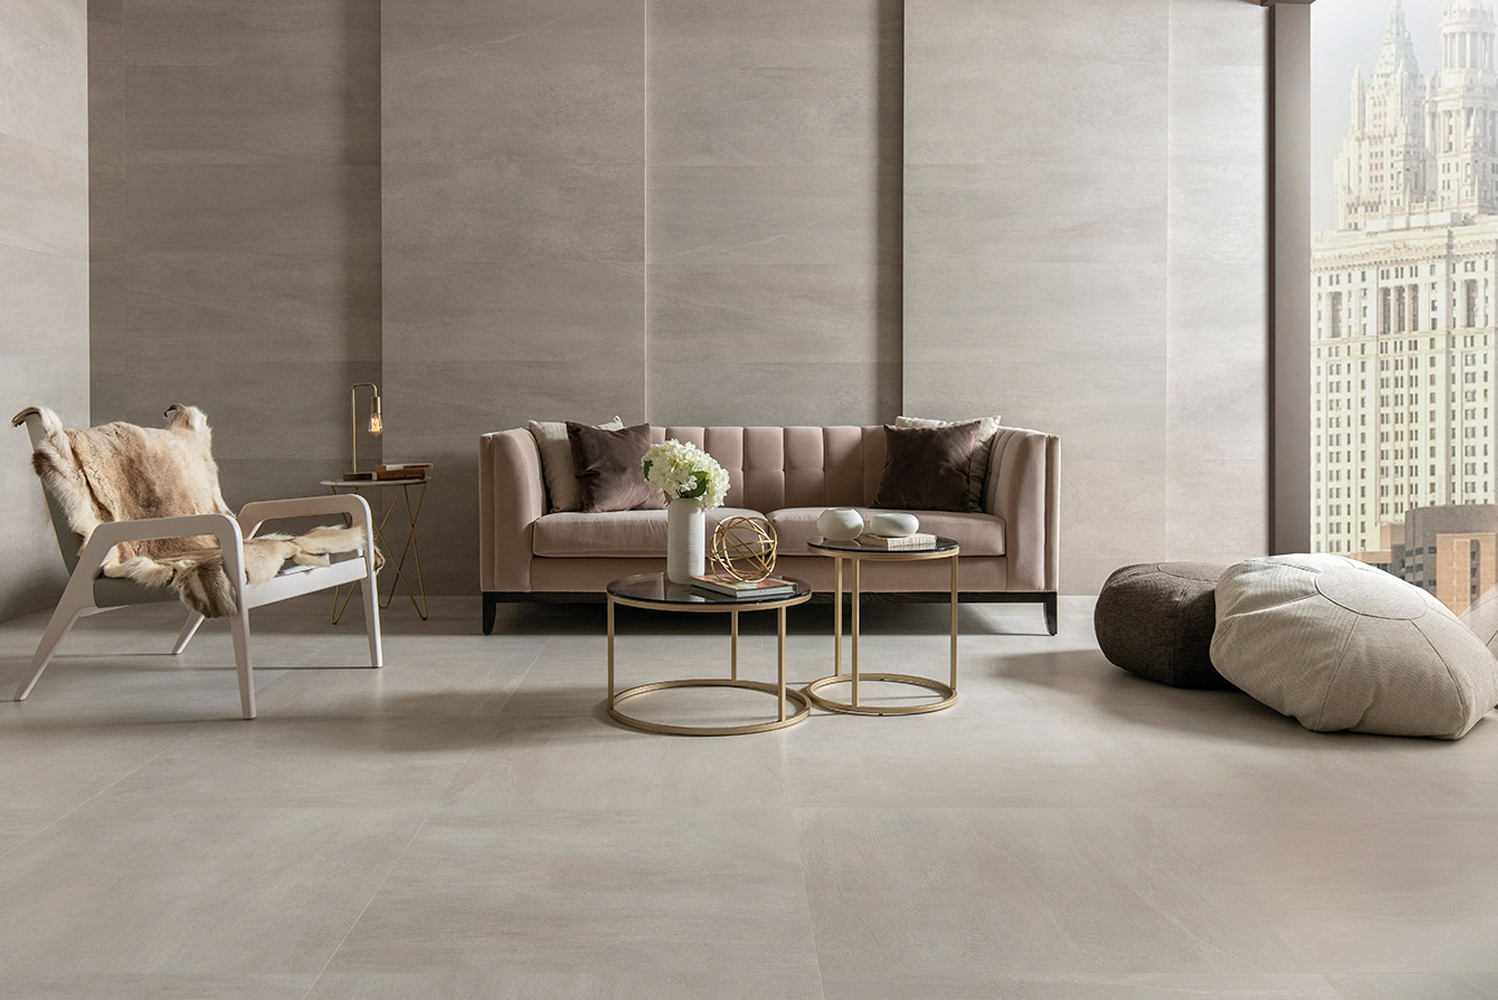 Introducing the Urban collection by Porcelanosa a line of floor and wall tiles featuring stone-origin veining 